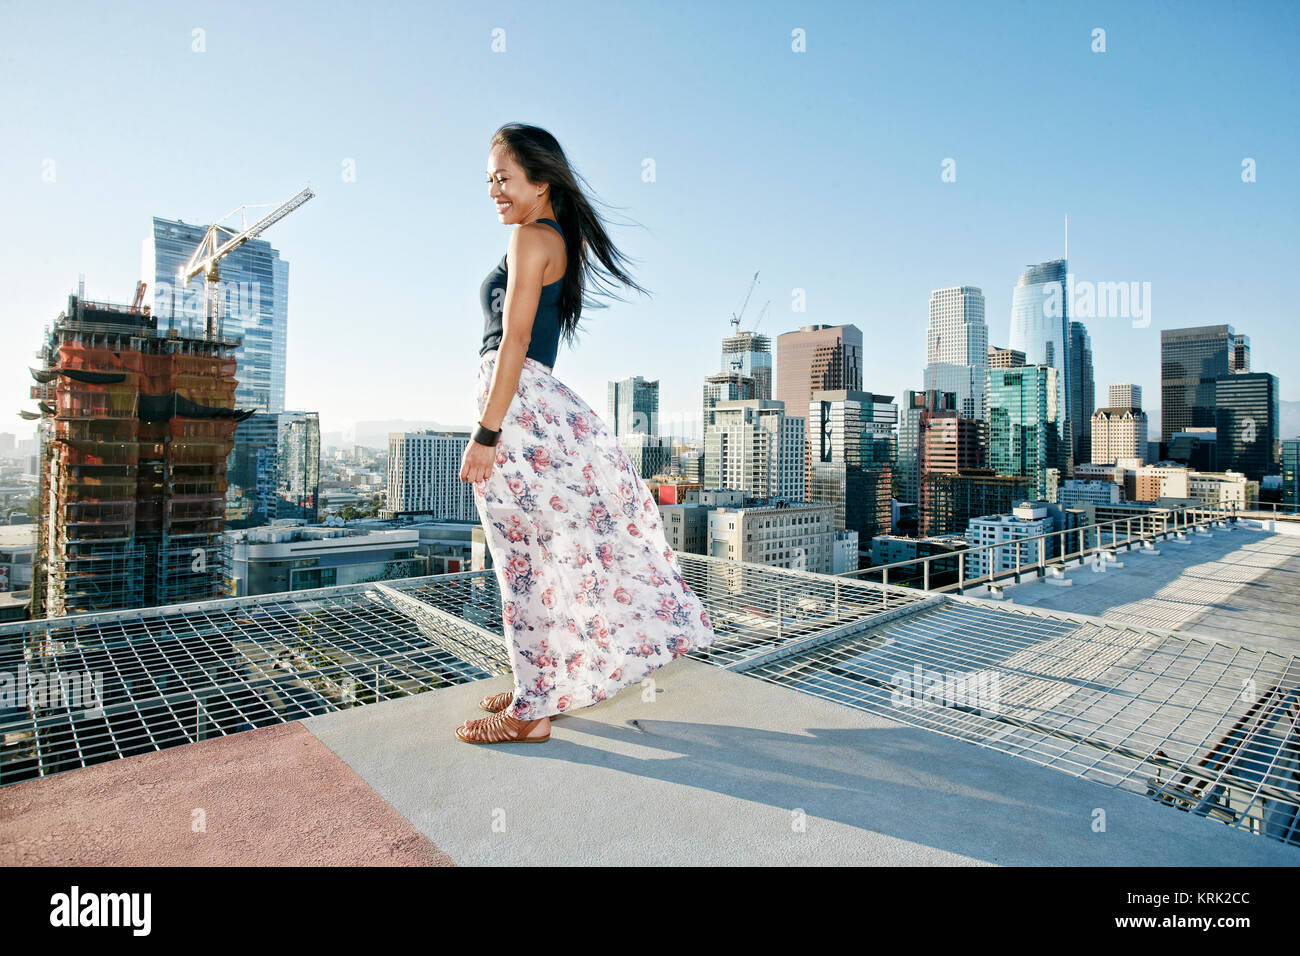 Smiling Asian woman standing on urban rooftop venteux Banque D'Images